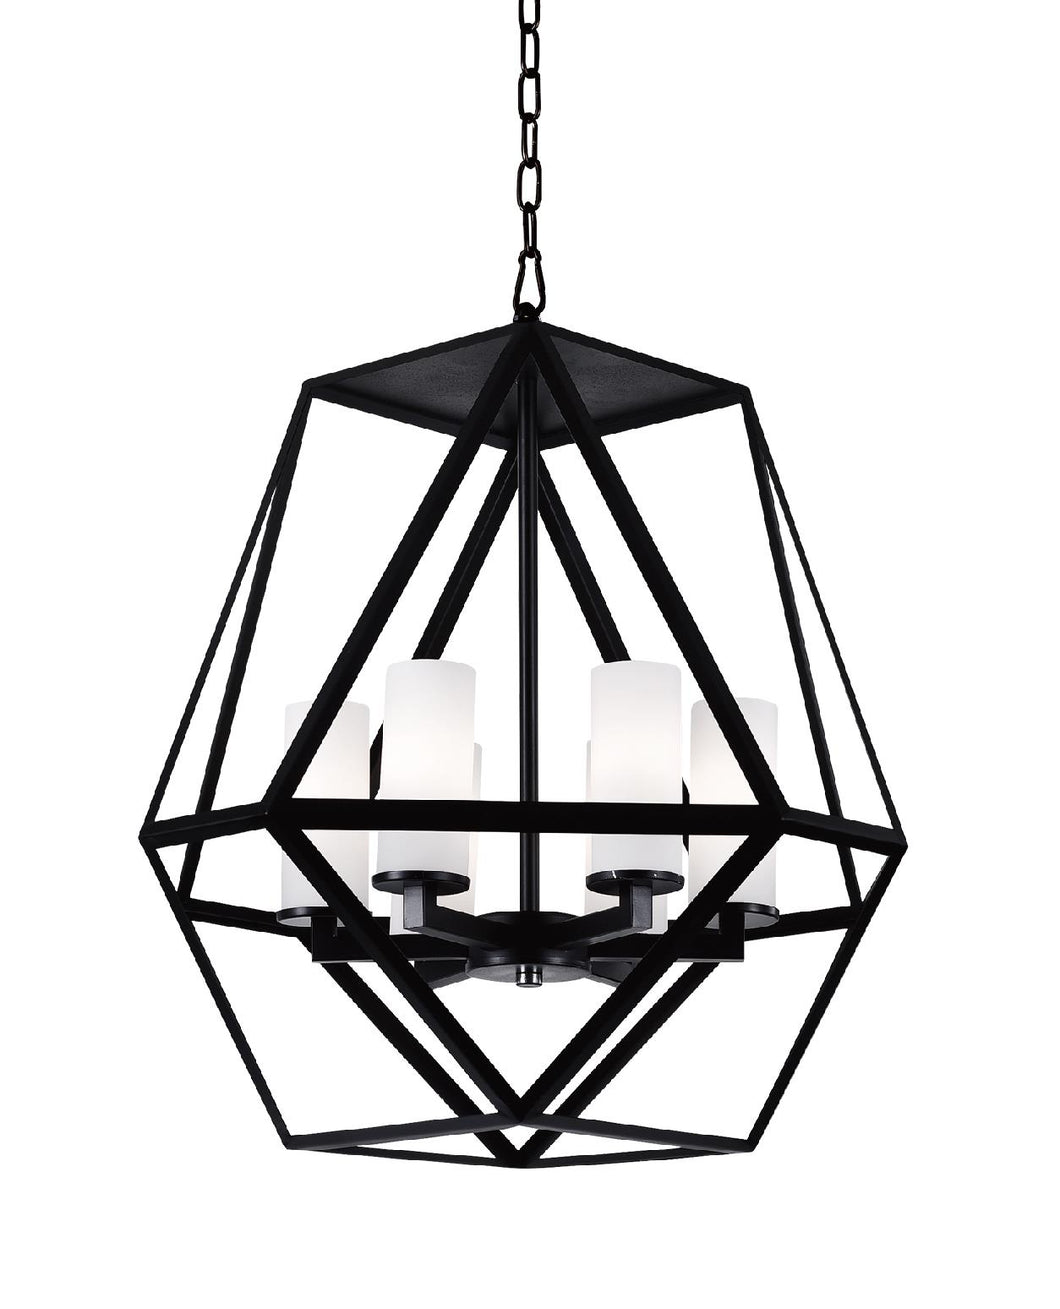 6 Light Candle Chandelier with Black finish